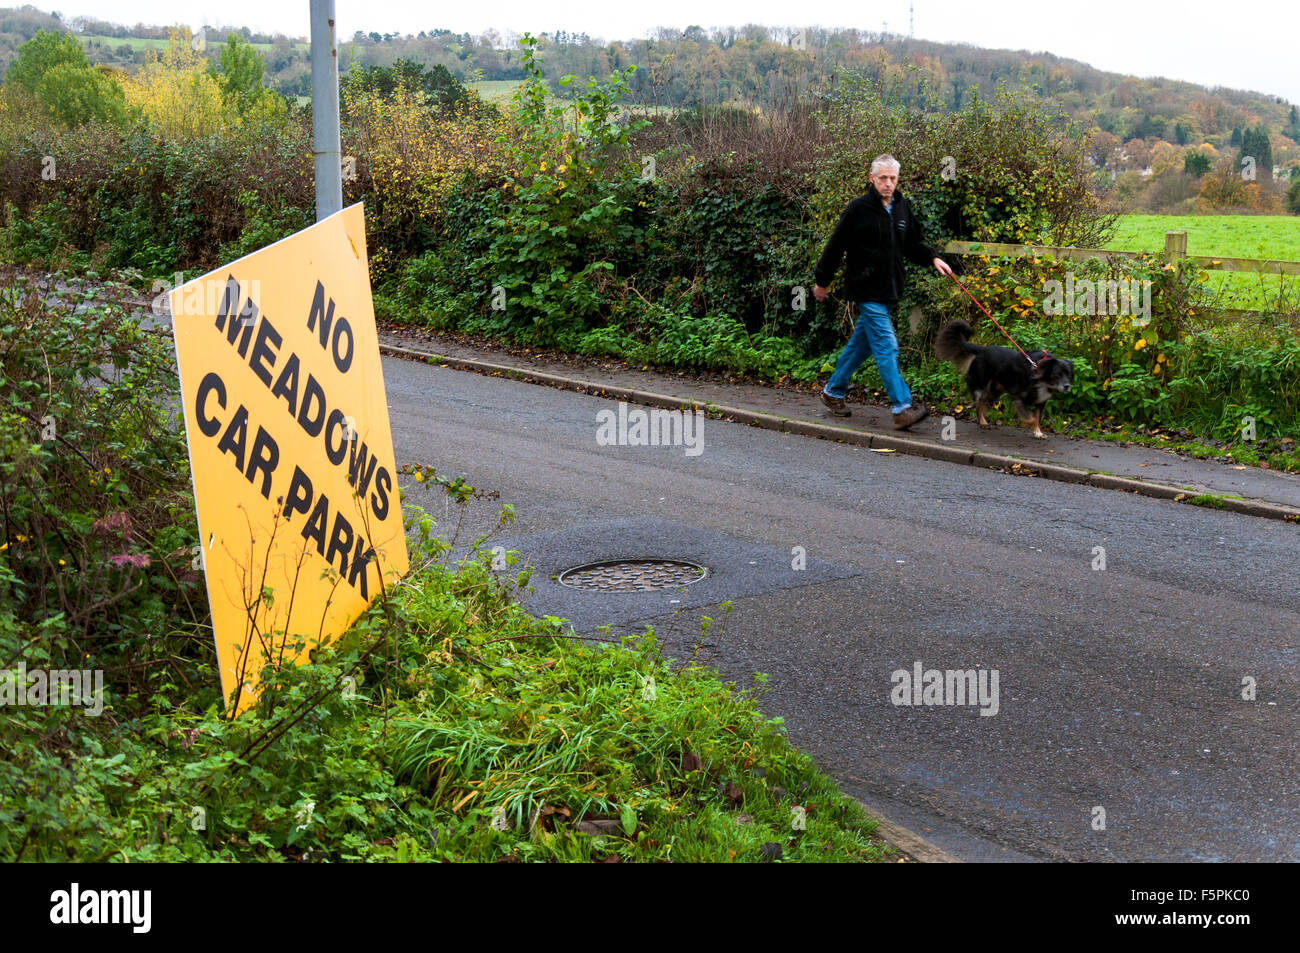 Bathampton, Bath, Somerset, UK. 8th November 2015. A dog walker passes campaign sign to stop the potential building of a park and ride carpark on ancient water meadows (in background) in Bathampton near Bath.  Photo by:Richard Wayman/Alamy Live News Stock Photo